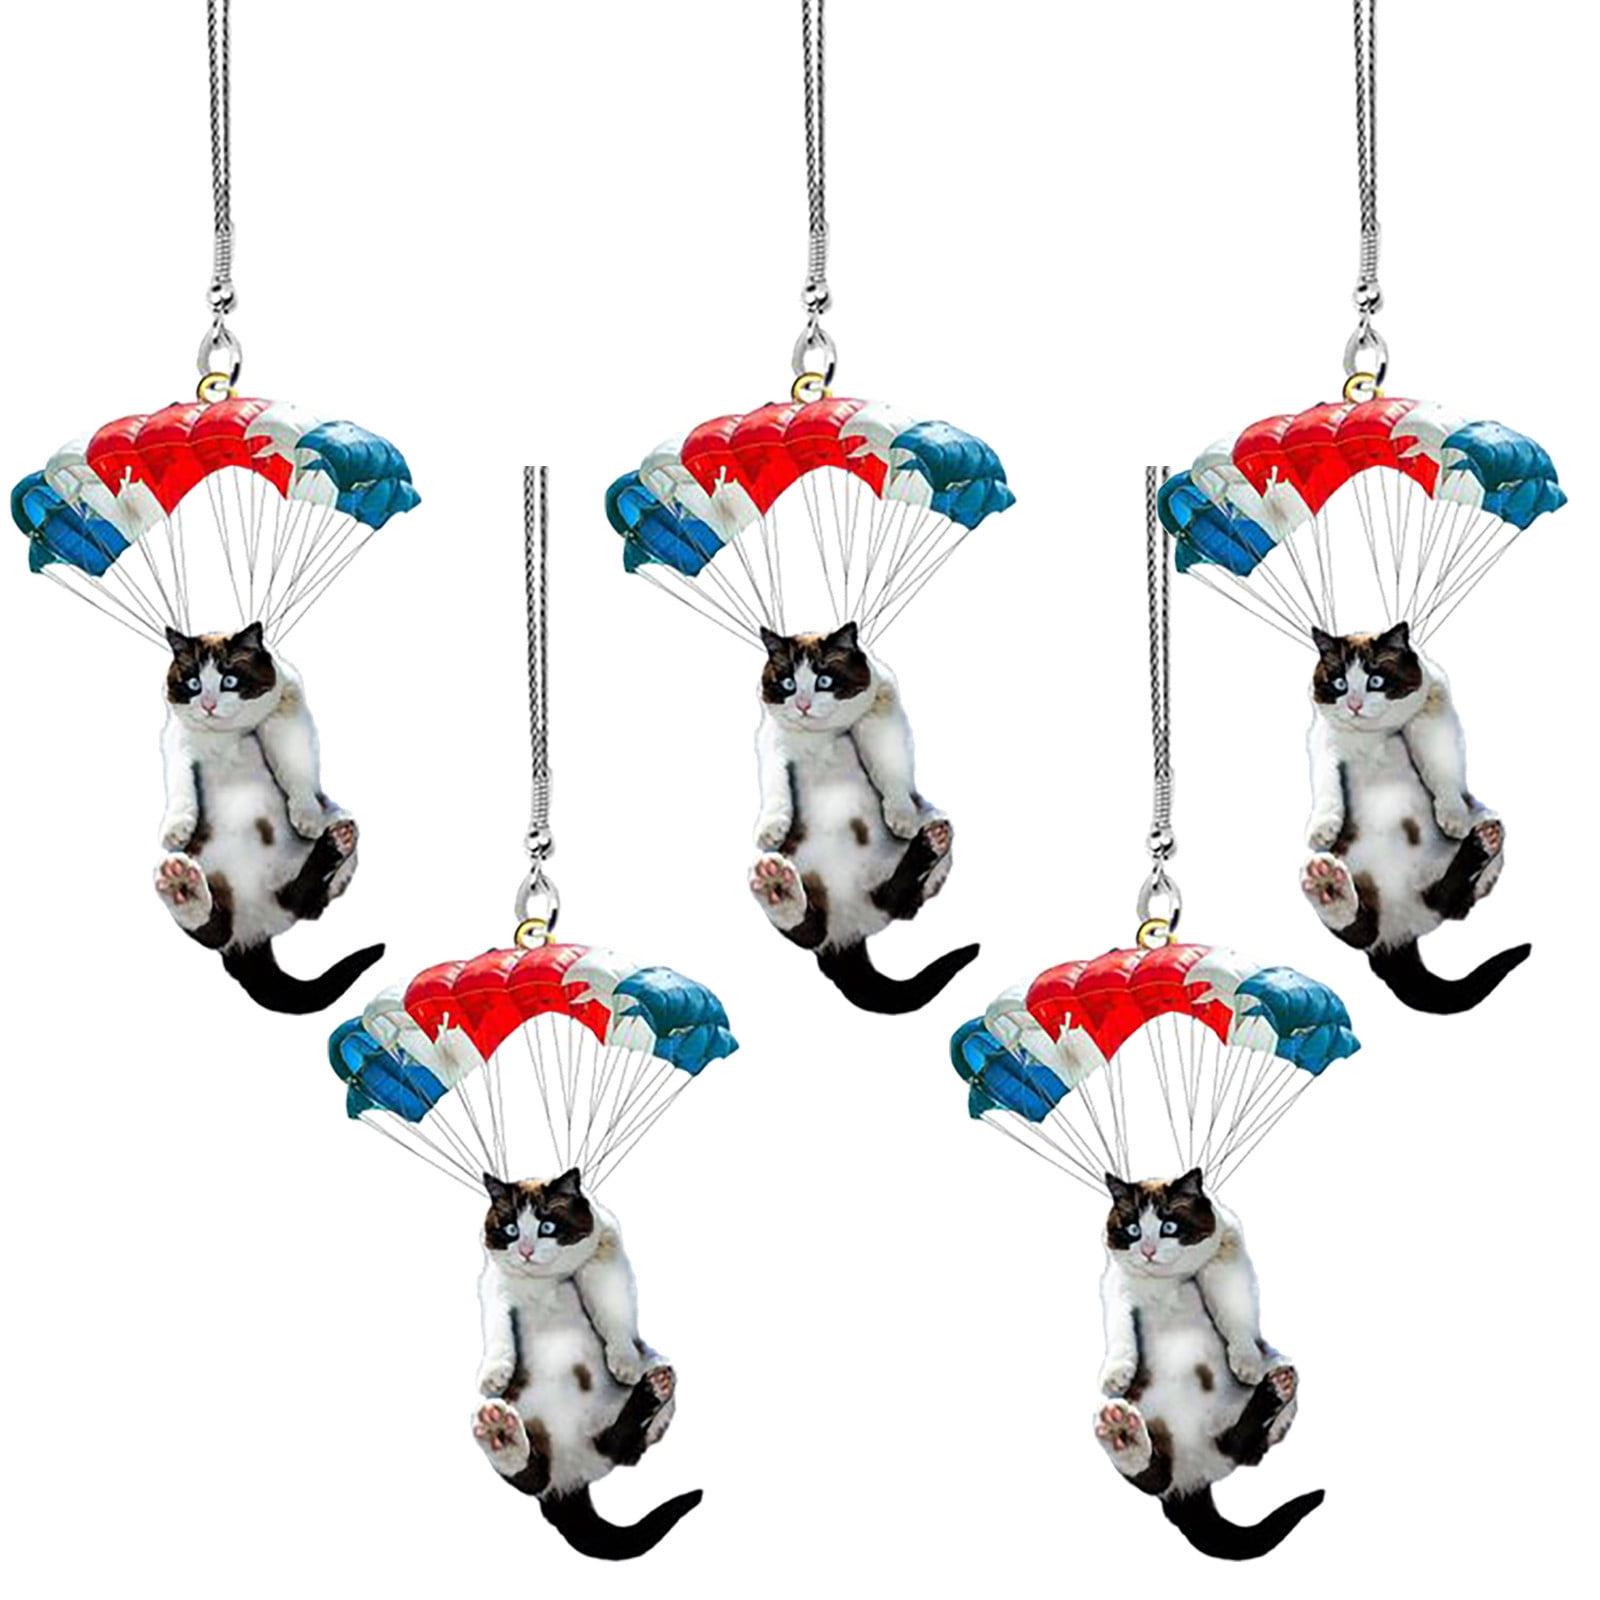 Cat Car Hanging accessories Ornament With Colorful Balloon Car Interior  Decor